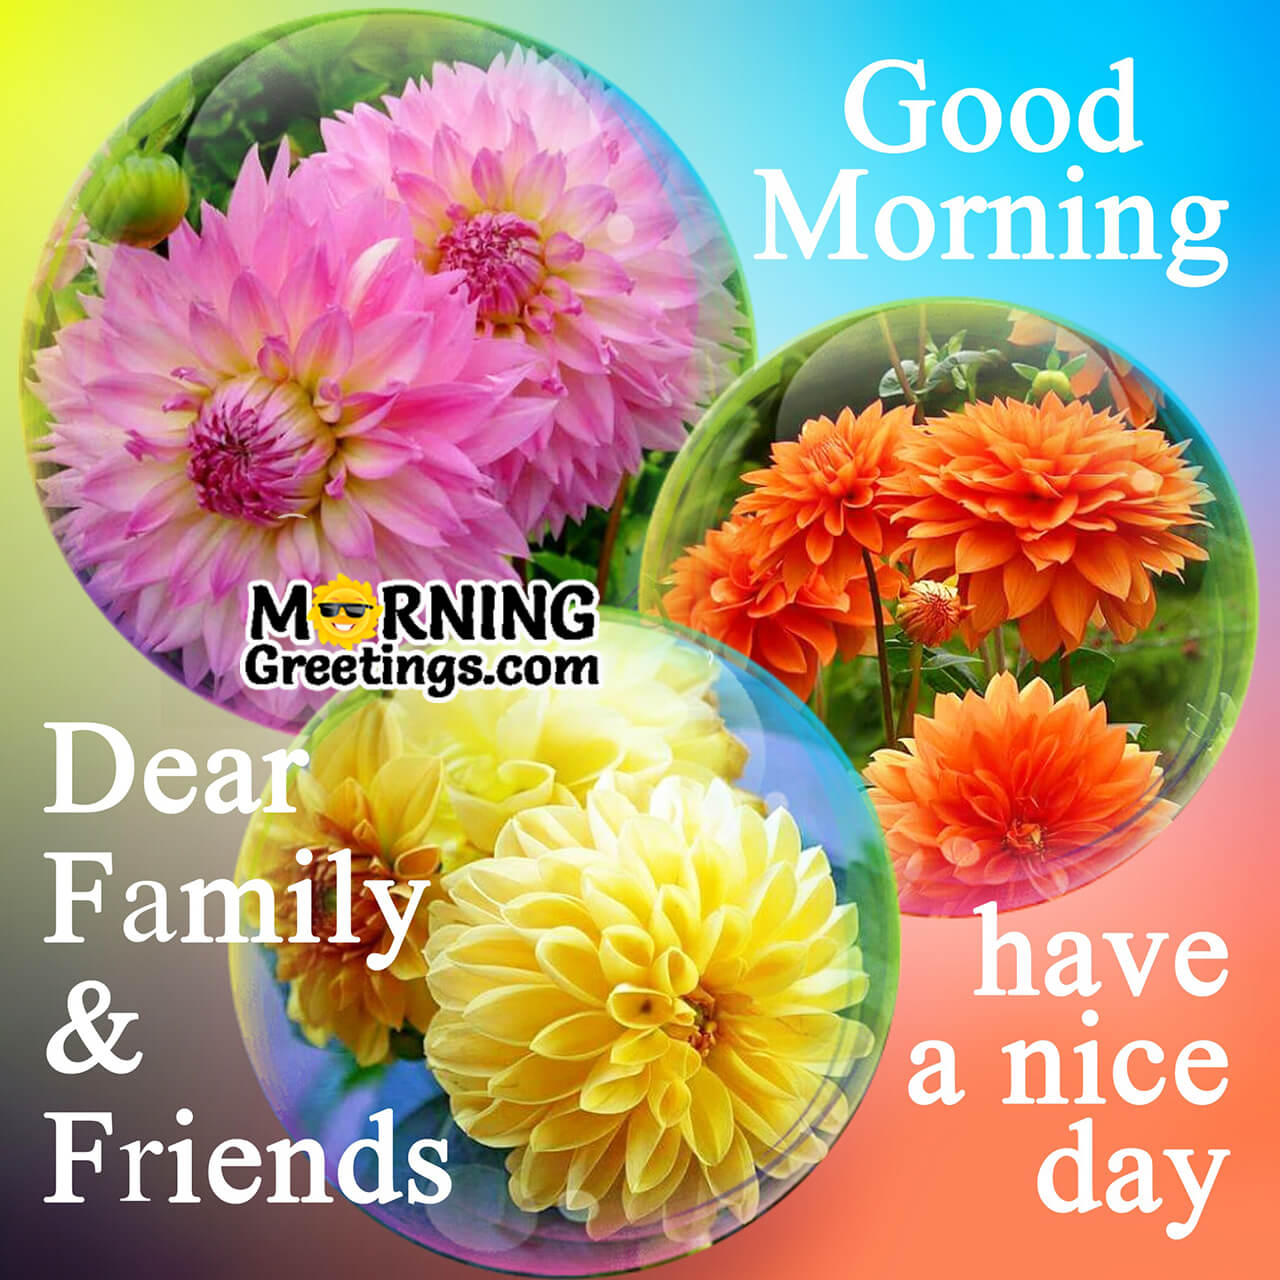 Good Morning Quotes For Friends And Family